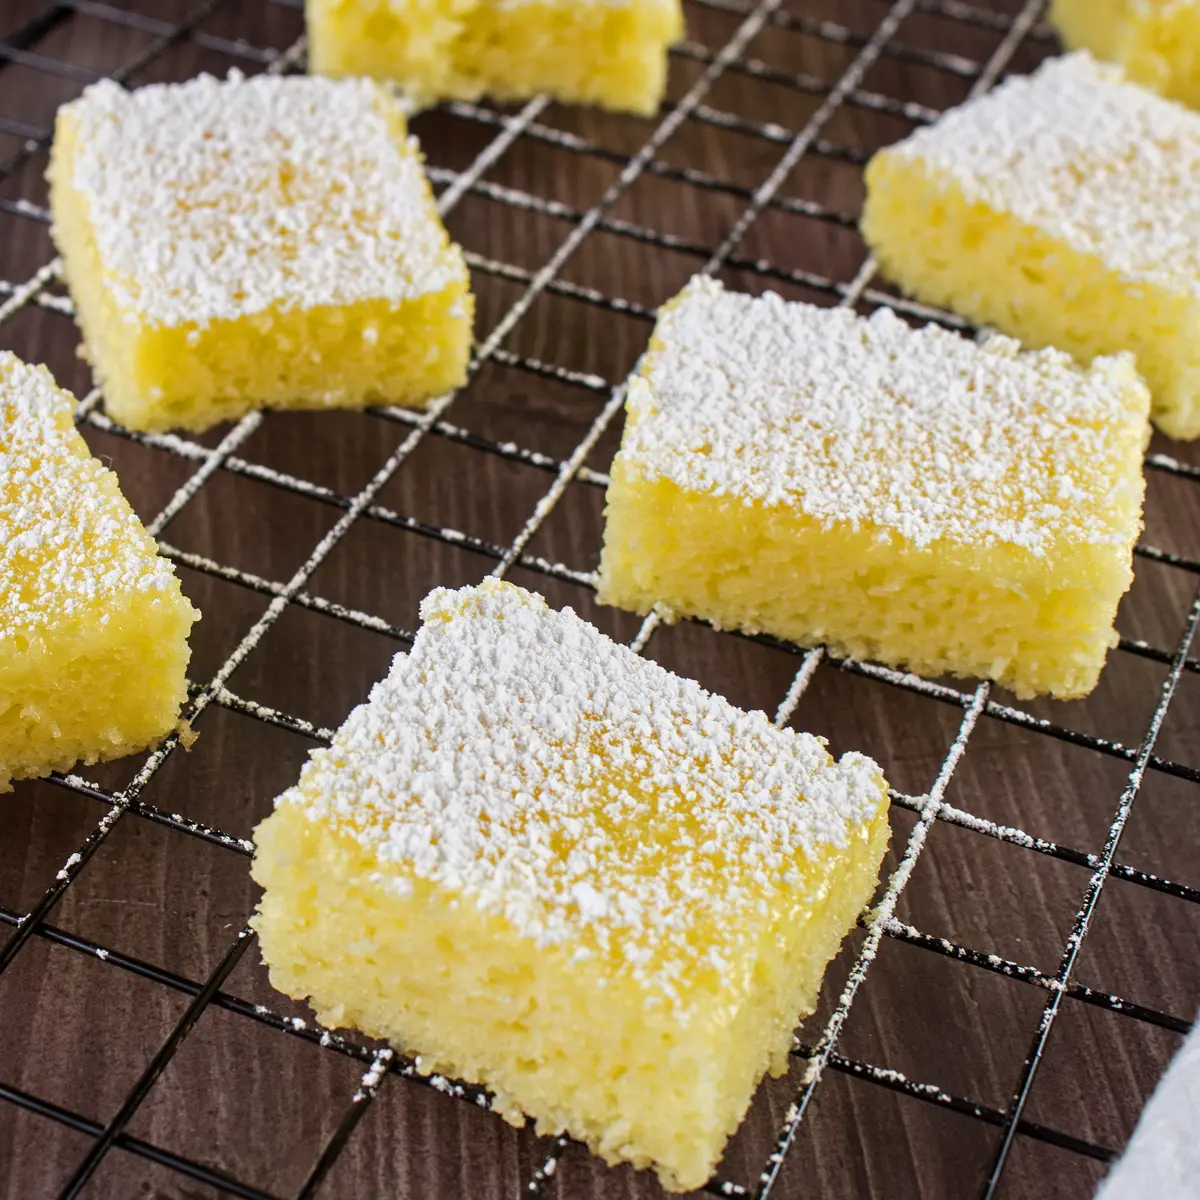 Large square image of easy two ingredient lemon bars cut and dusted with powdered sugar, set on a black wire cooling rack over wood grain surface